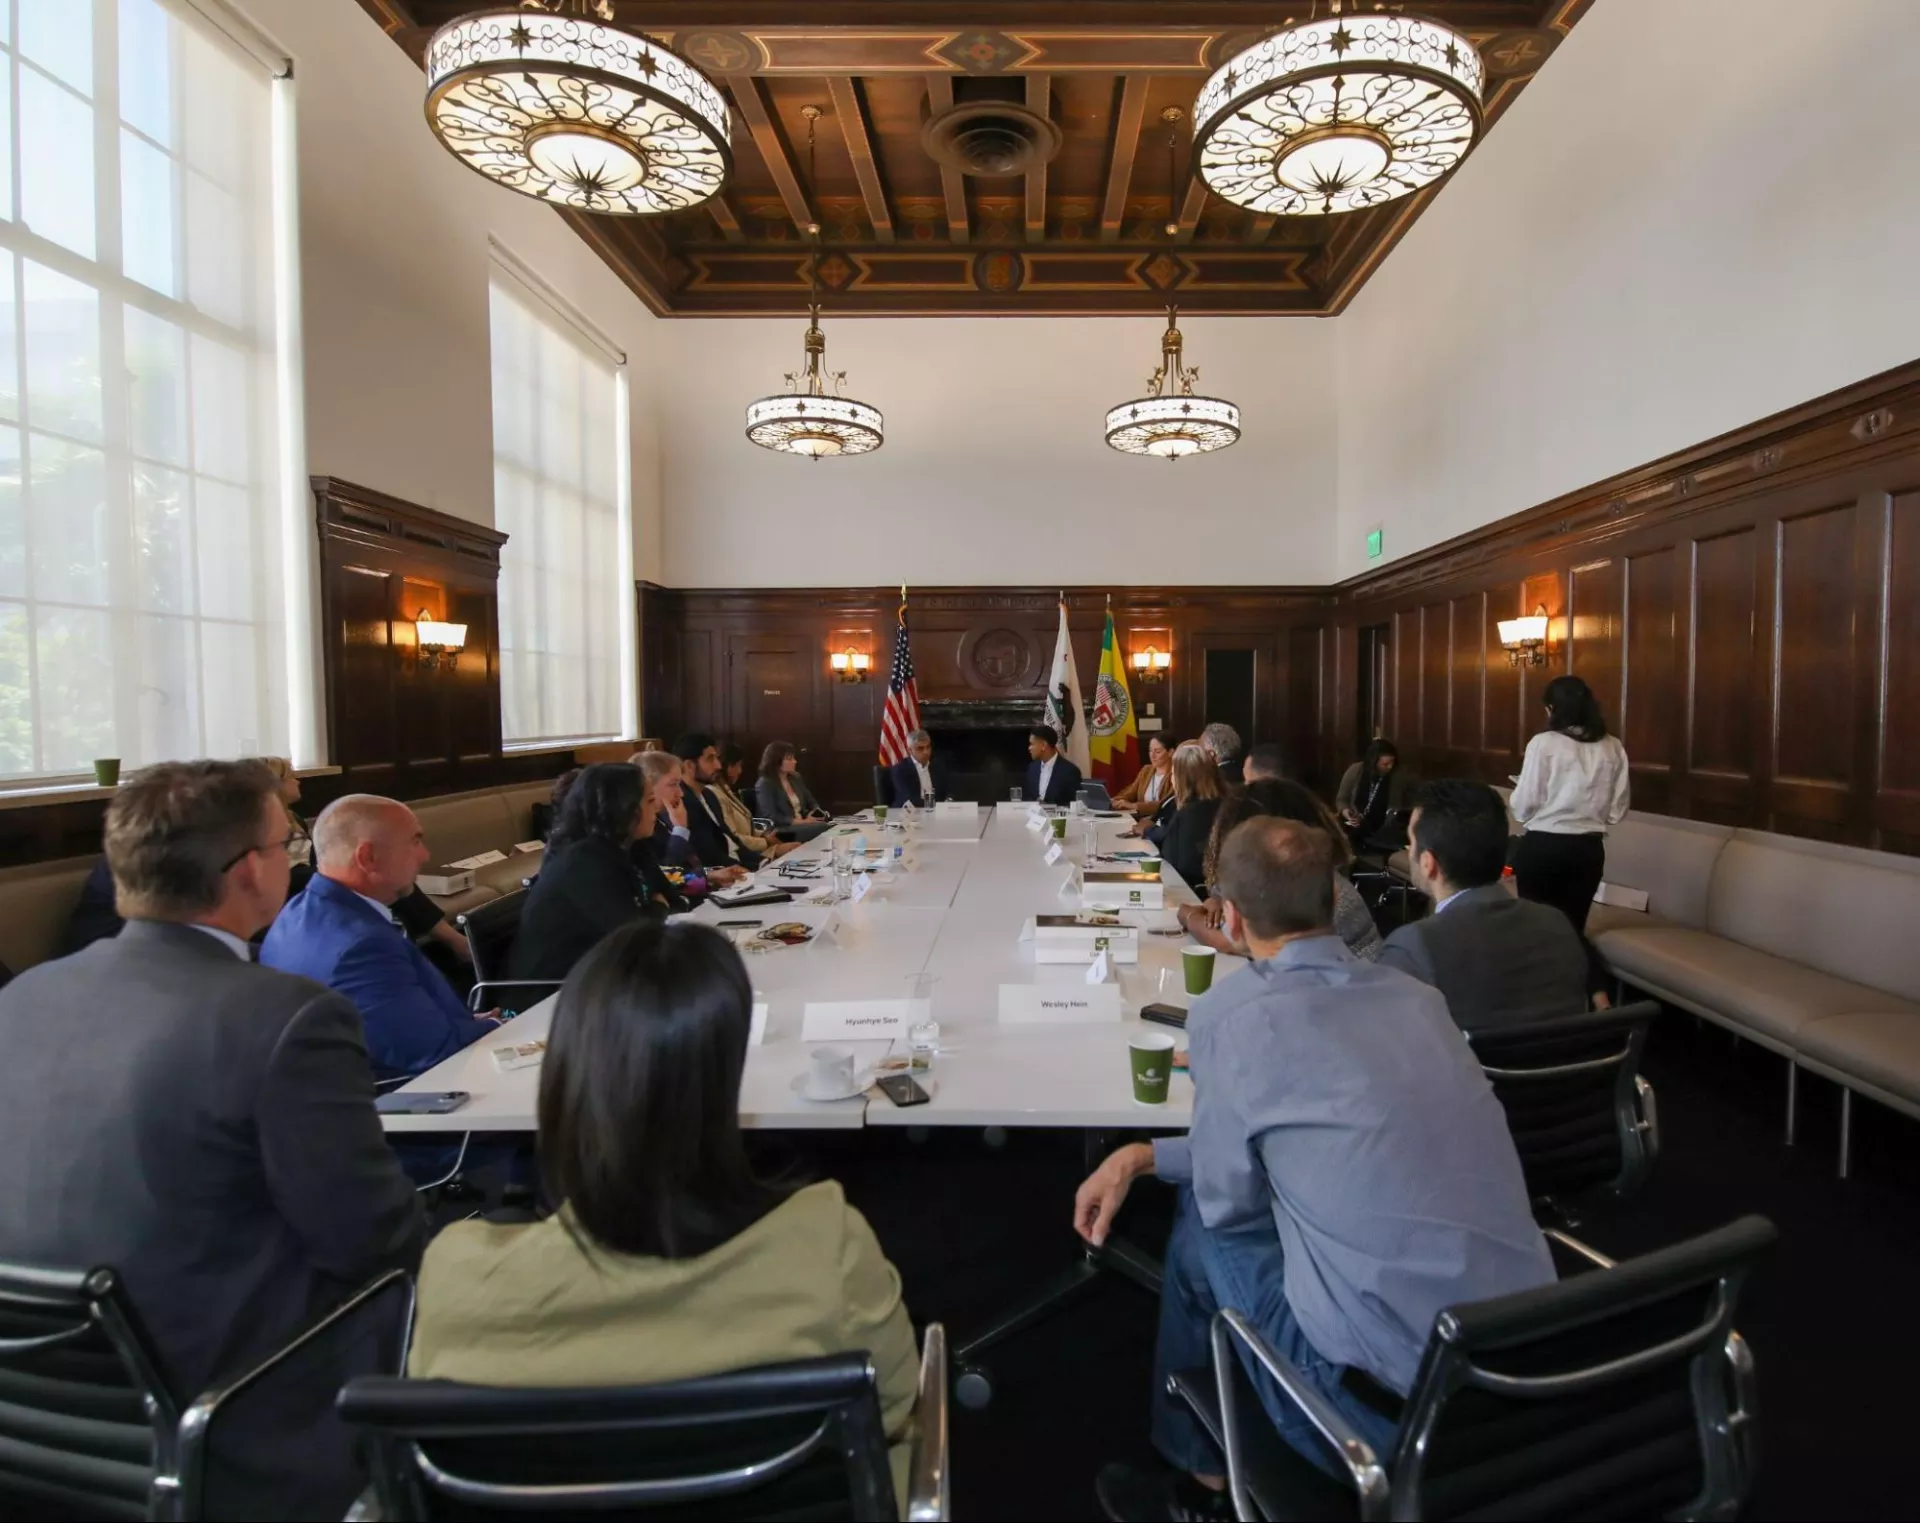 Health experts, attorneys, law enforcement and cannabis entrepreneurs joined DCR staff and London Mayor Sadiq Khan to discuss the Los Angeles experience in cannabis legalization, business licensing and regulation in the press room at Los Angeles City Hall.